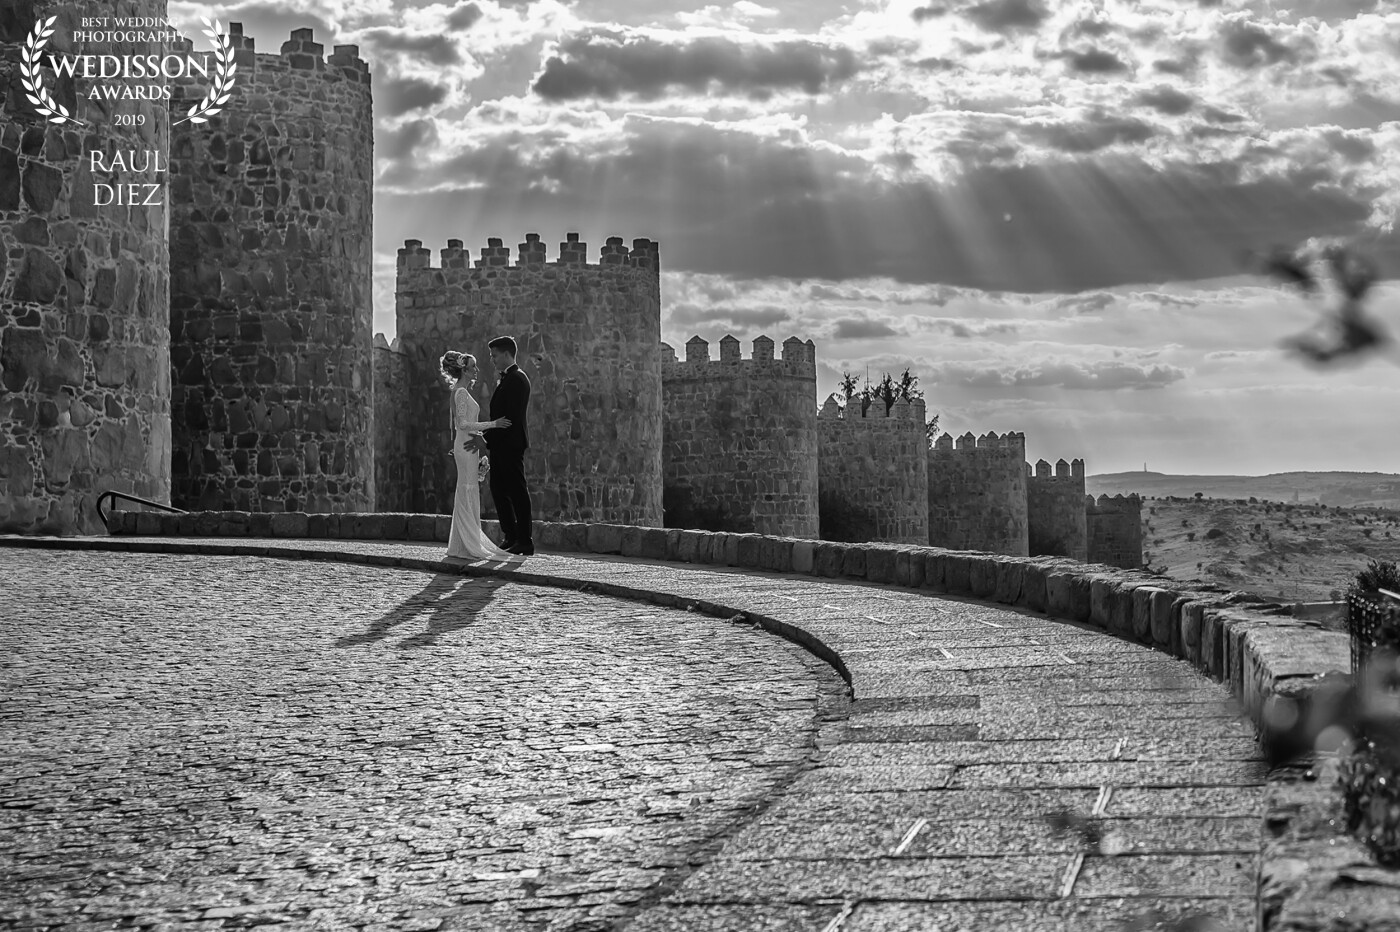 Maria and Geoff came from Canada to celebrate their wedding in Avila (Spain). This photo was taken during the photoshoot after the ceremony. Ävila and its medieval wall is a wonderful setting